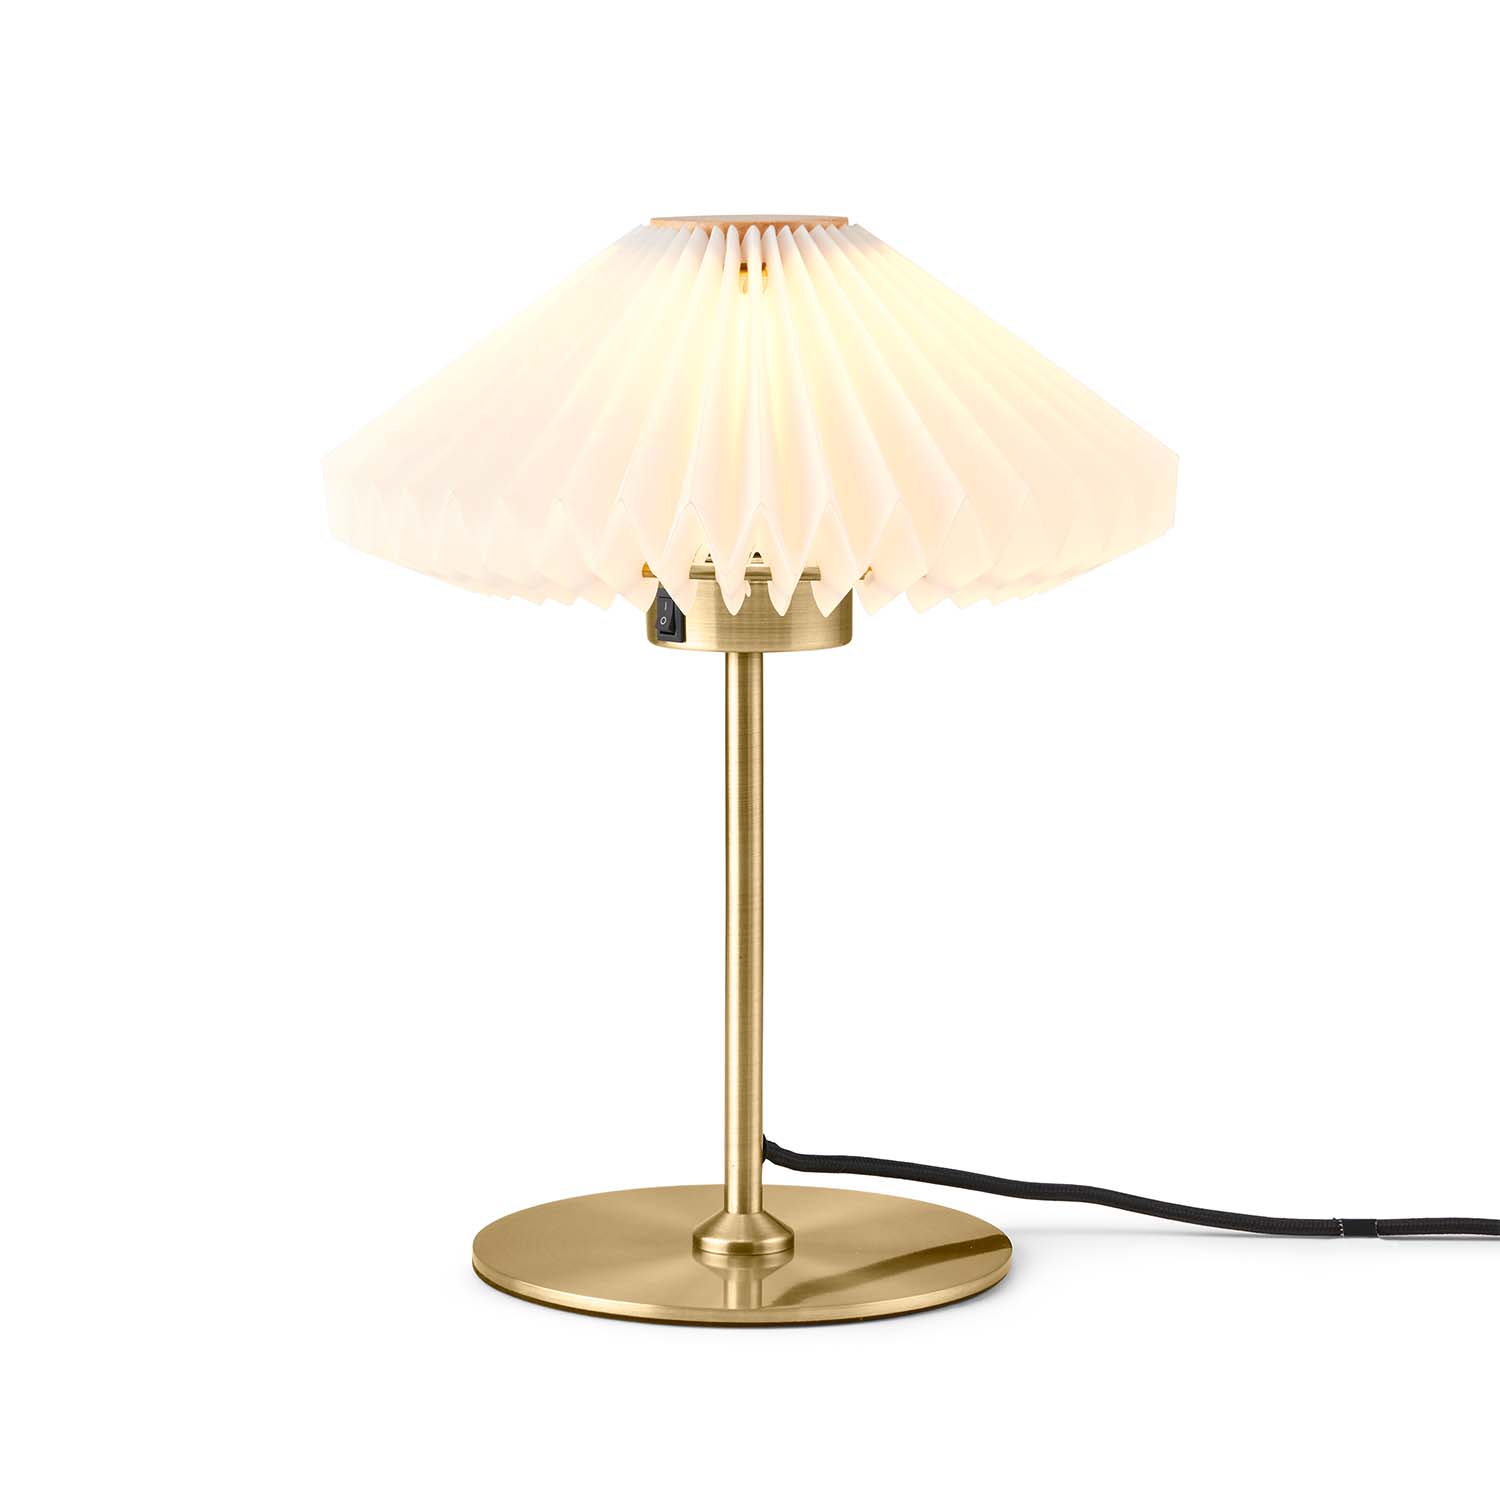 PARIS - Table lamp with chic and designer pleated lampshade